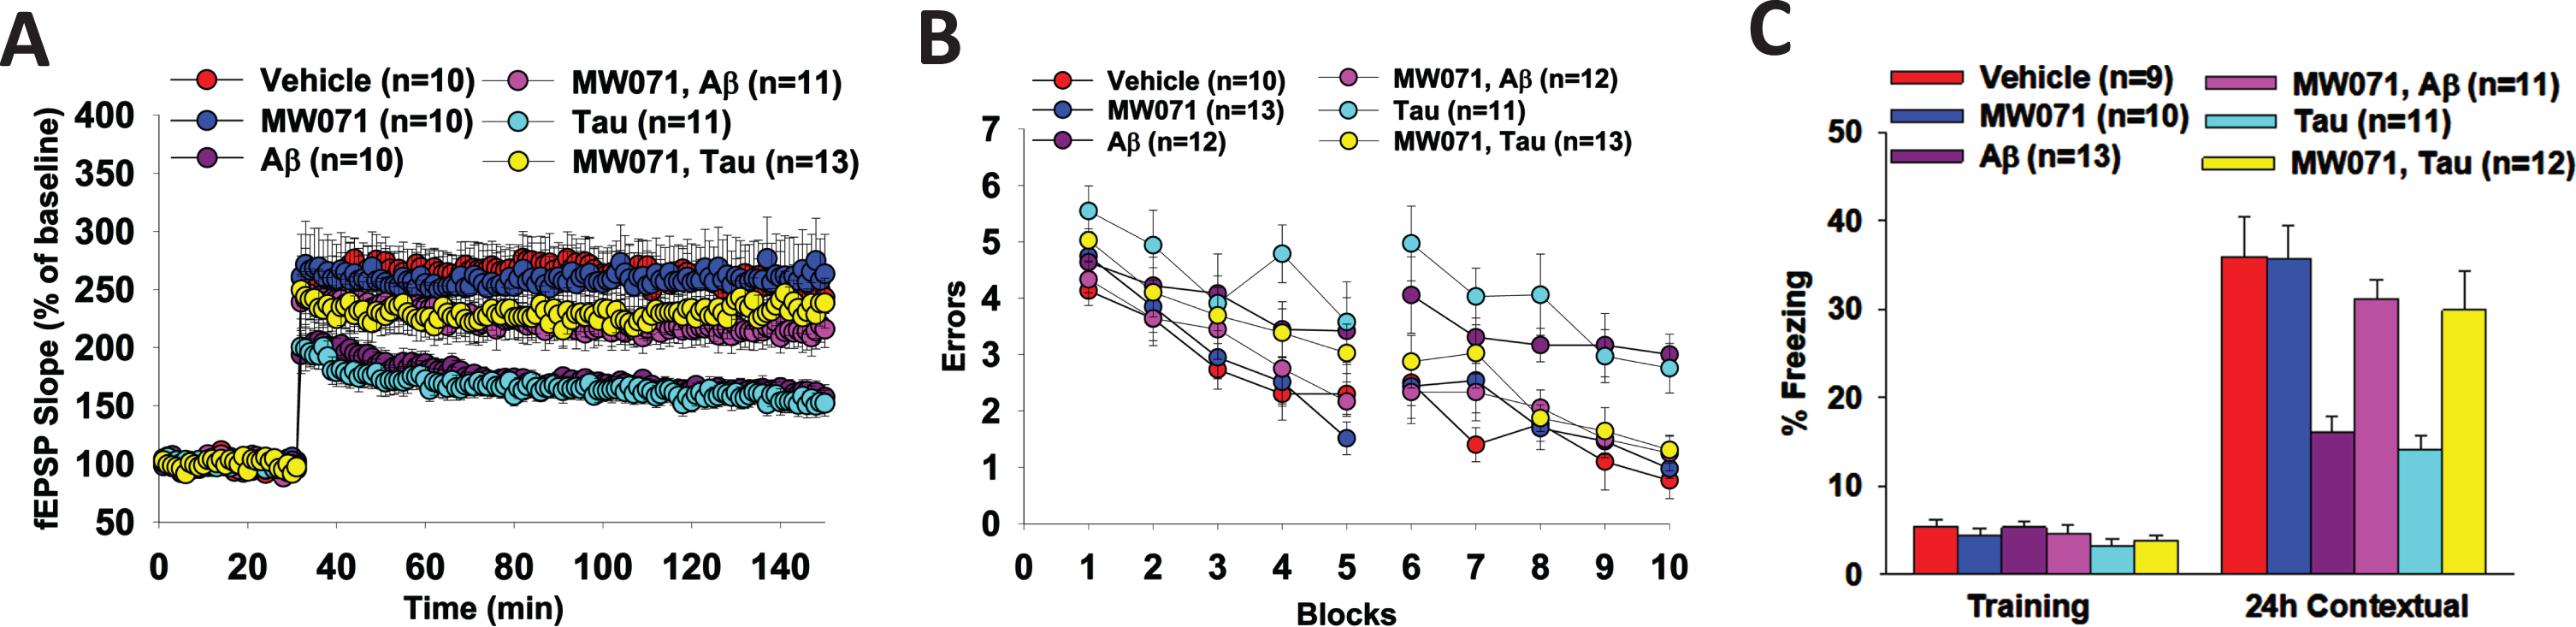 Efficacy of MW071 against Aβ- and tau-oligomer induced defects in LTP and memory. A) Perfusion with MW071 (10μM) rescues the LTP defect in hippocampal slices treated with 200 nM Aβ- or 50 nM tau-oligomers. MW071 alone did not affect potentiation. ANOVA for repeated measures between groups: F(1,19) = 27.85, p <  0.0001 vehicle versus Tau; F(1,18) = 24.74, p <  0.0001 vehicle versus Aβ; F(1,22) = 10.37, p = 0.0039 Tau versus Tau + MW071; F(1,19) = 7.222, p = 0.0146 Aβ versus Aβ+ MW071; (F(1, 18) = 0.0082, p = 0.93 vehicle versus MW071.Vehicle: N = 10 (5 males, 5 females), MW071: N = 10 (5 males, 5 females), Aβ: N = 10 (5 males, 5 females), Aβ+ MW071: N = 11 (5 males, 6 females), Tau: N = 11 (6 males, 5 females), Tau + MW071: N = 13 (7 males, 6 females). B, C) MW071 protects mice against the impairment of spatial (B) and associative memory (C) by infusion of 200 nM Aβ- or 500 nM tau-oligomers into dorsal hippocampi bilaterally, while MW071 alone does not affect performance. RAWM: ANOVA for repeated measures among all (day 2): F(5,65) = 6.158, p <  0.0001. One-way ANOVA for block 10: F(5,65) = 8.552, p <  0.0001; Bonferroni’s p <  0.0001 vehicle versus Aβ; p = 0.0006 vehicle versus Tau; p = 0.0013 Aβ versus Aβ + MW071; p = 0.0108 Tau versus Tau + MW071 and p = 1 vehicle versus MW071. Vehicle: N = 10 (5 males, 5 females), MW071: N = 13 (6 males, 7 females), Aβ: N = 12 (6 males, 6 females), Aβ+ MW071: N = 12 (6 males, 6 females), Tau: N = 11 (5 males, 6 females), Tau+ MW071: N = 13 (7males, 6 females). Fear conditioning: Baseline: One-way ANOVA F(5,60) = 1.217, p = 0.3122, 24 h Contextual: One-way ANOVA F(5,60) = 9.391, p <  0.0001; Bonferroni p = 0.0002 vehicle versus Aβ; p <  0.0001 vehicle versus Tau; p = 0.0043 Aβ versus Aβ+ MW071; p = 0.028 Tau versus Tau + MW071; p = 1 vehicle versus MW071. Vehicle: N = 9 (5 males, 4 females), MW071: N = 10 (5 males, 5 females), Aβ: N = 13 (7 males, 6 females), Aβ+ MW071: N = 11 (6 males, 5 females), Tau: N = 11 (5 males, 6 females), Tau+ MW071: N = 12 (6 males, 6 females).